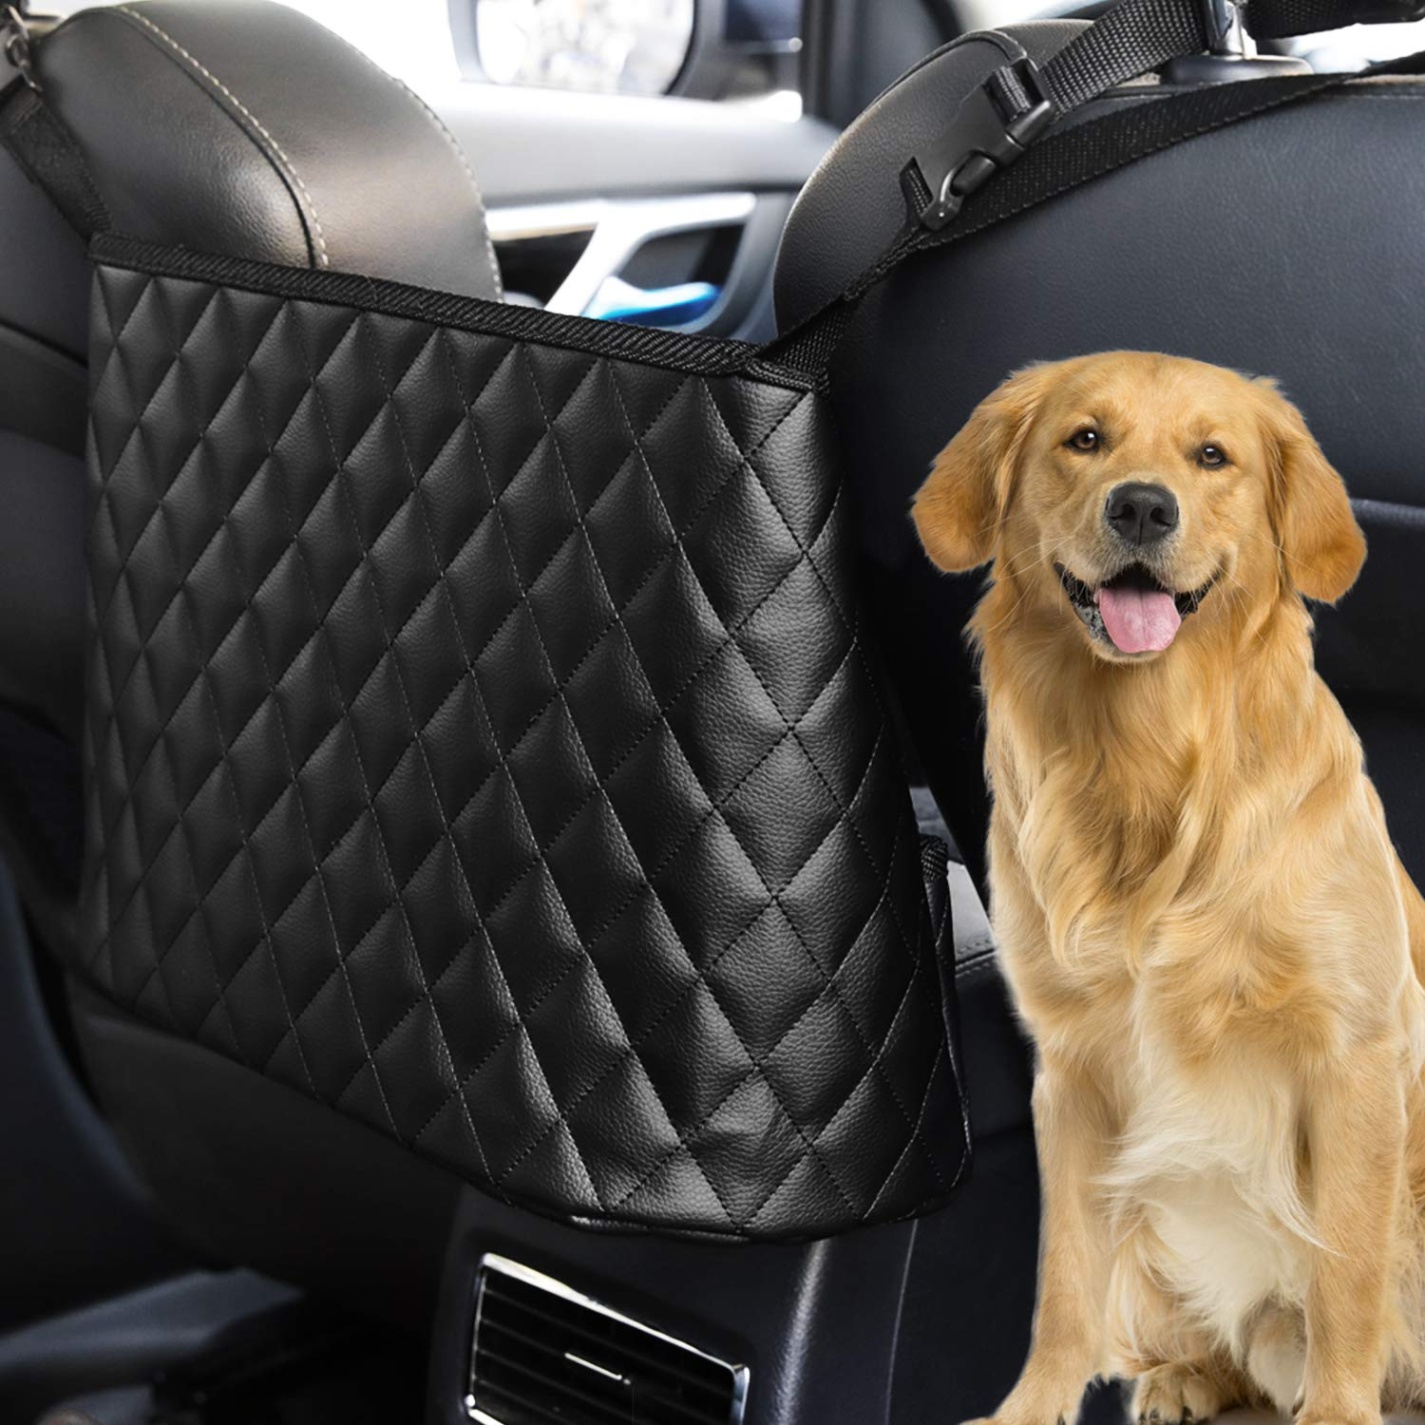 Upgrade Your Pup’s Ride: Top Dog Car Accessories For A Tail-Wagging Journey